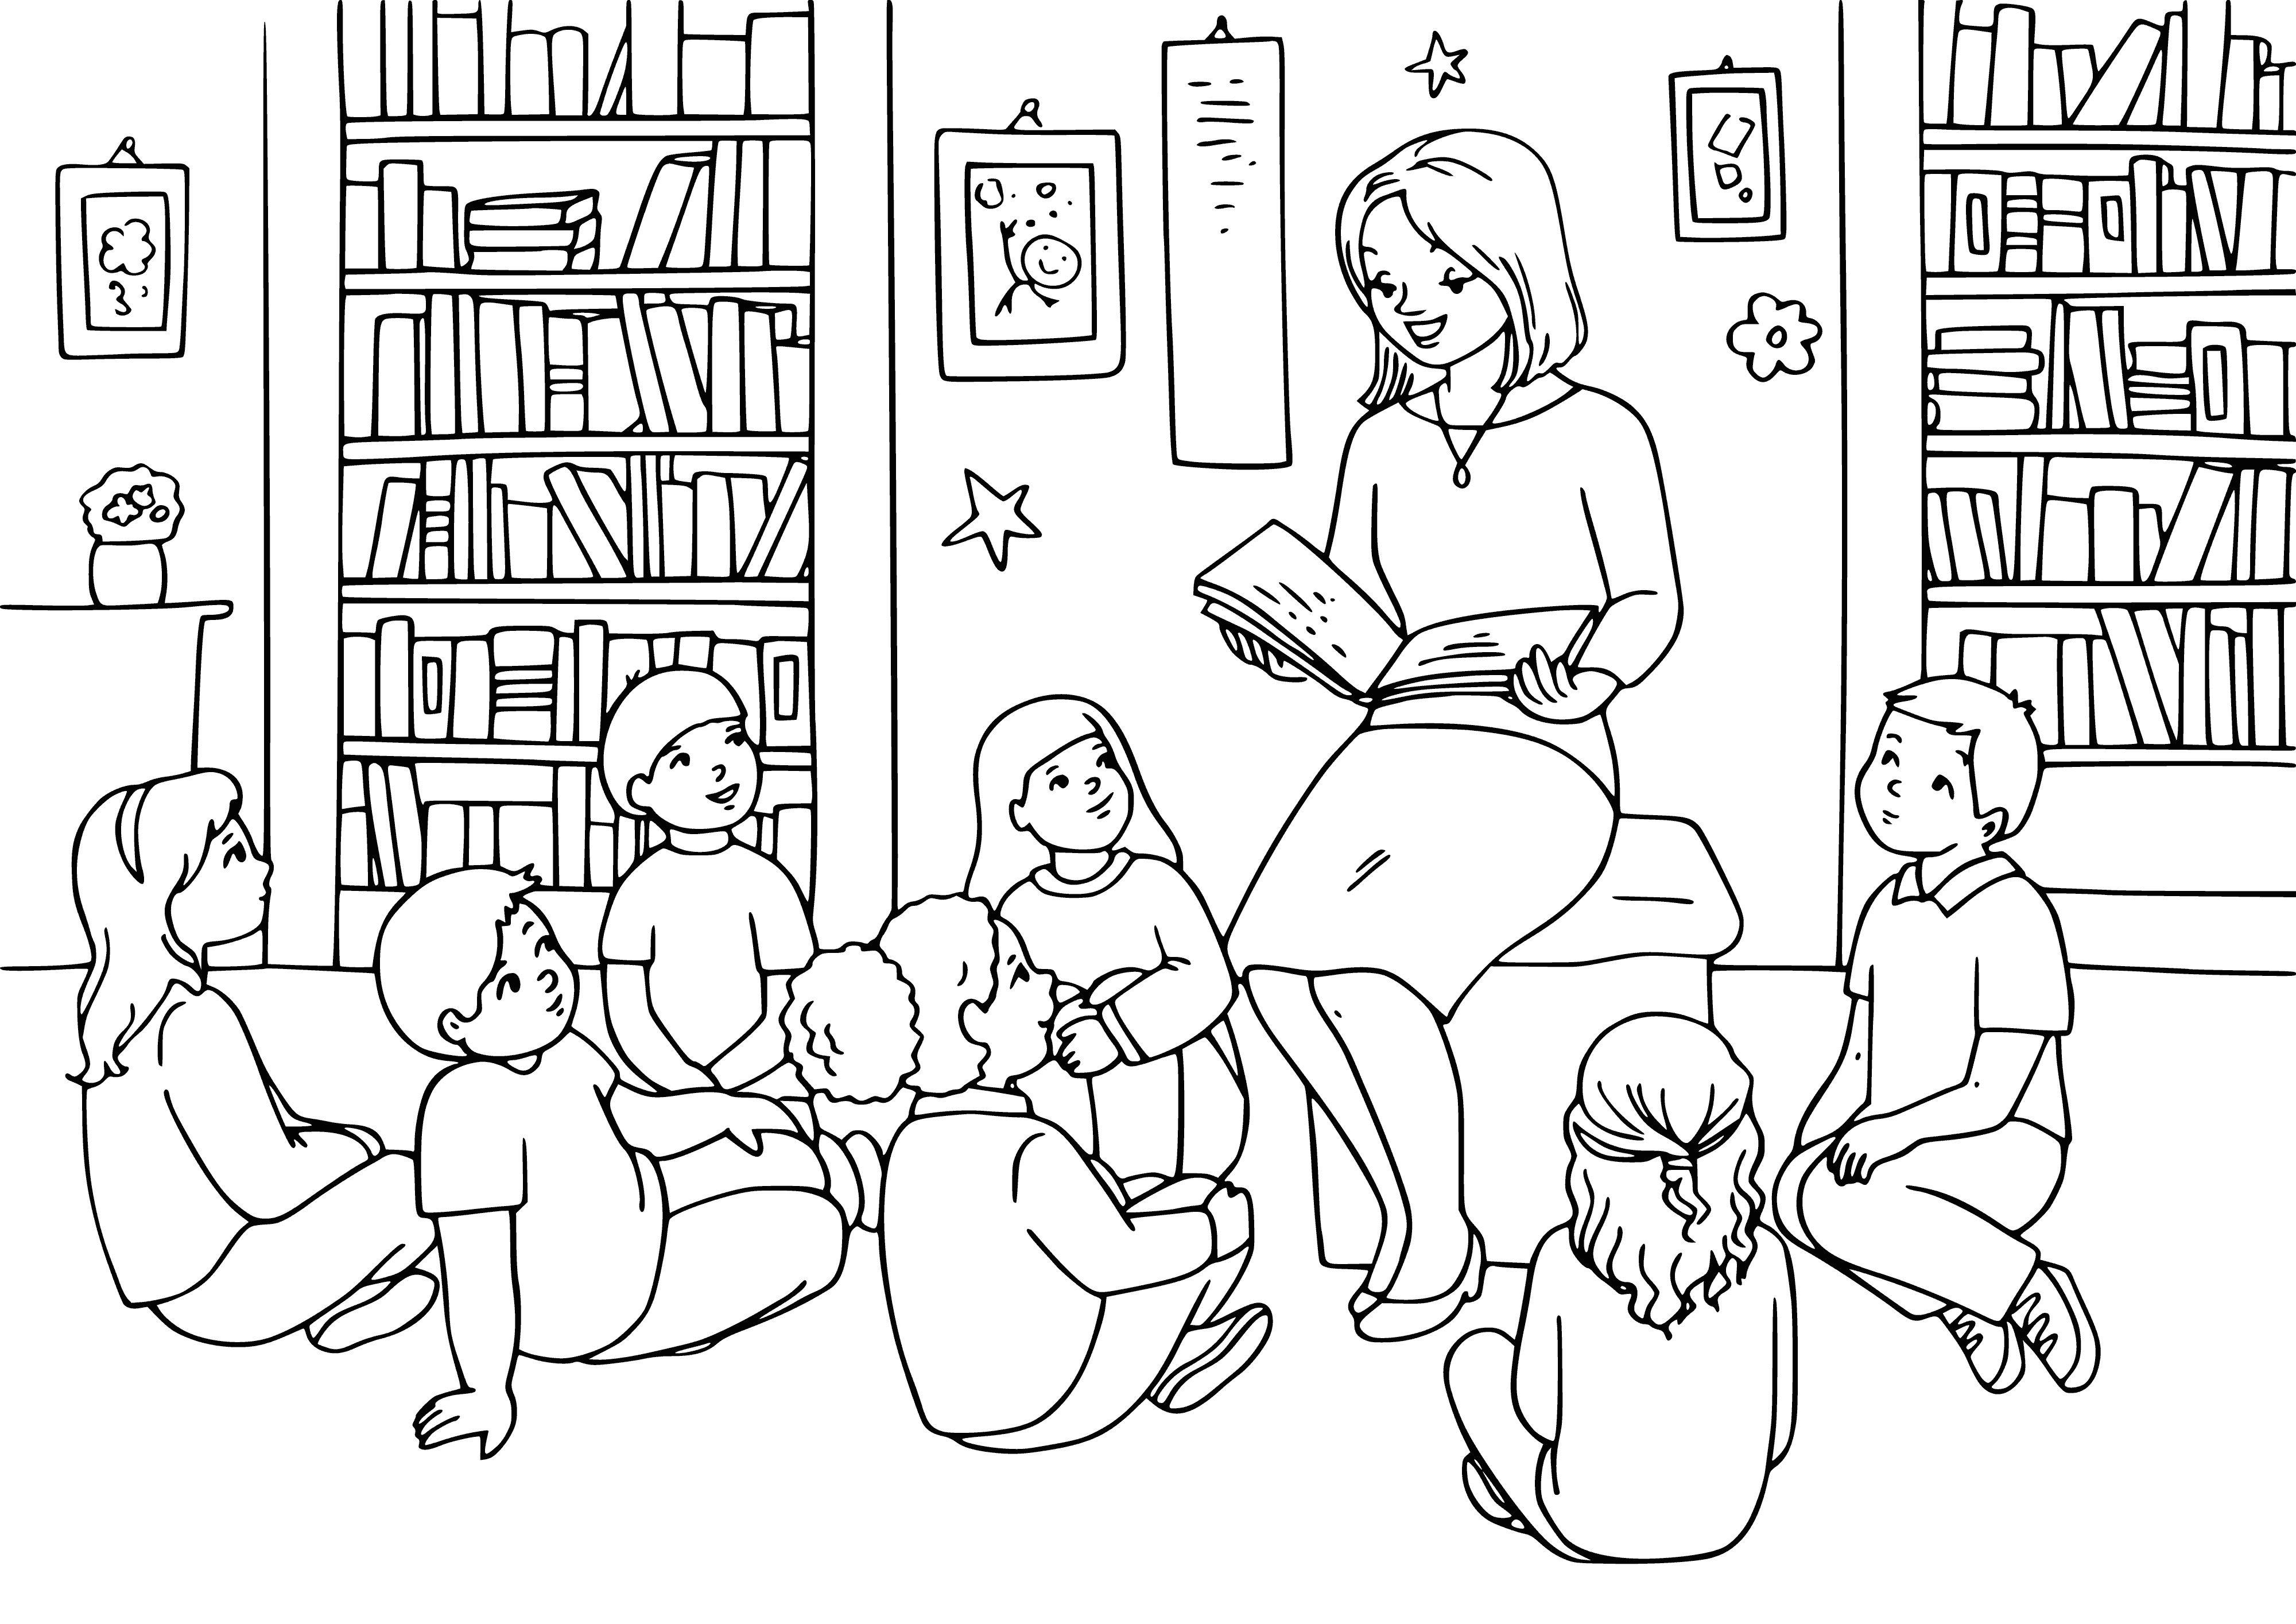 coloring page: Teacher reading to kids on floor, captivating their attention and sparking interest in learning.